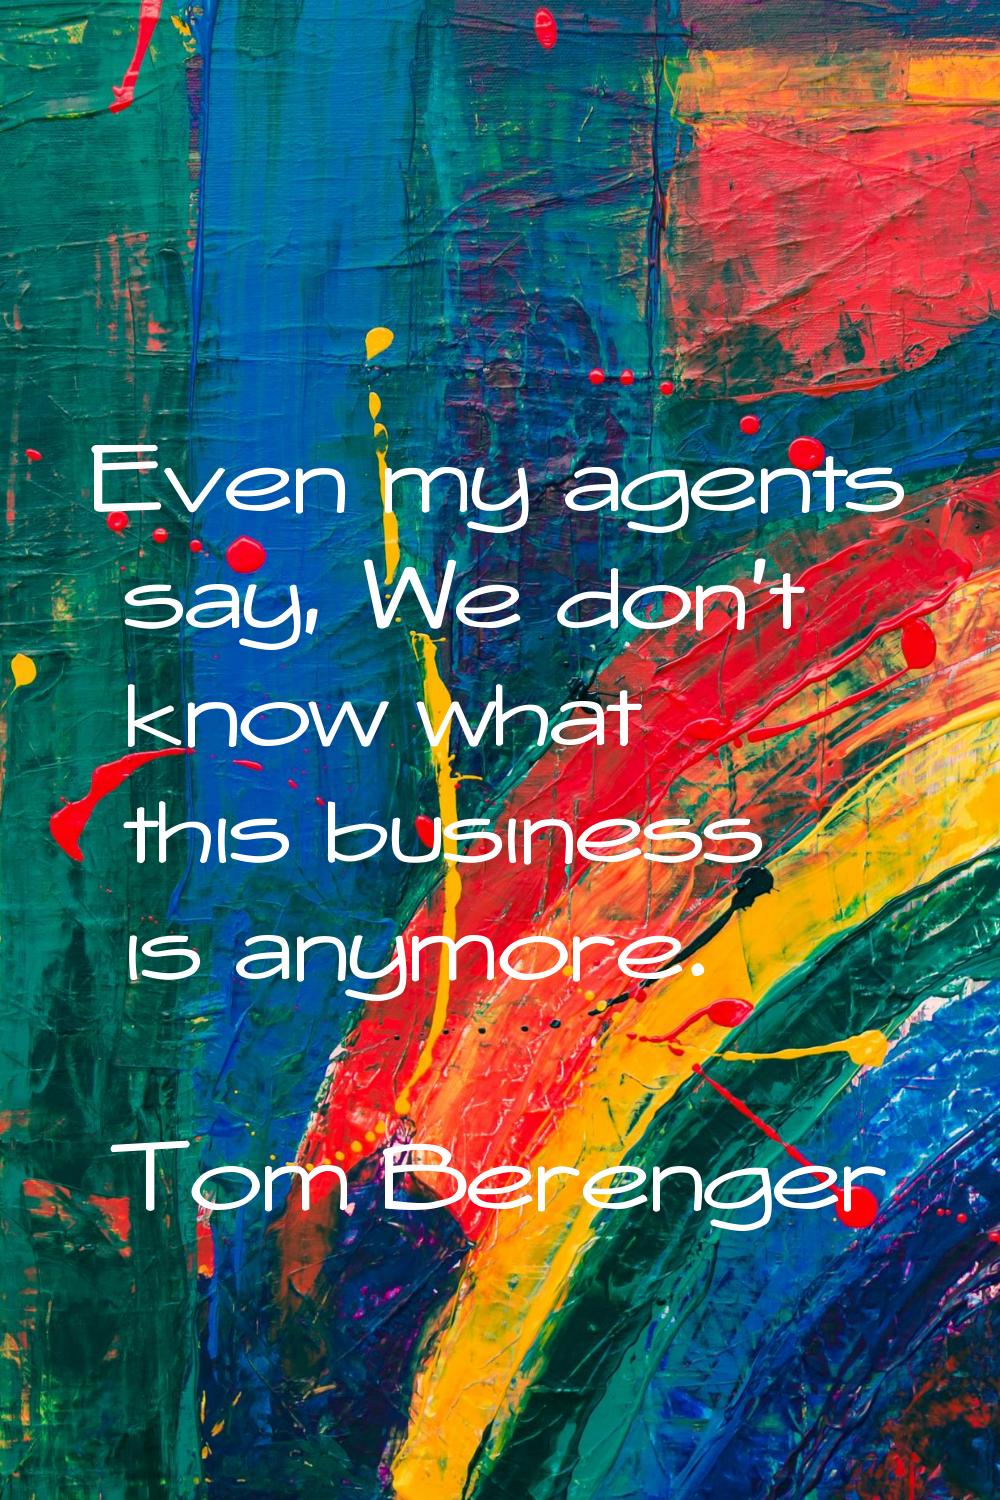 Even my agents say, We don't know what this business is anymore.